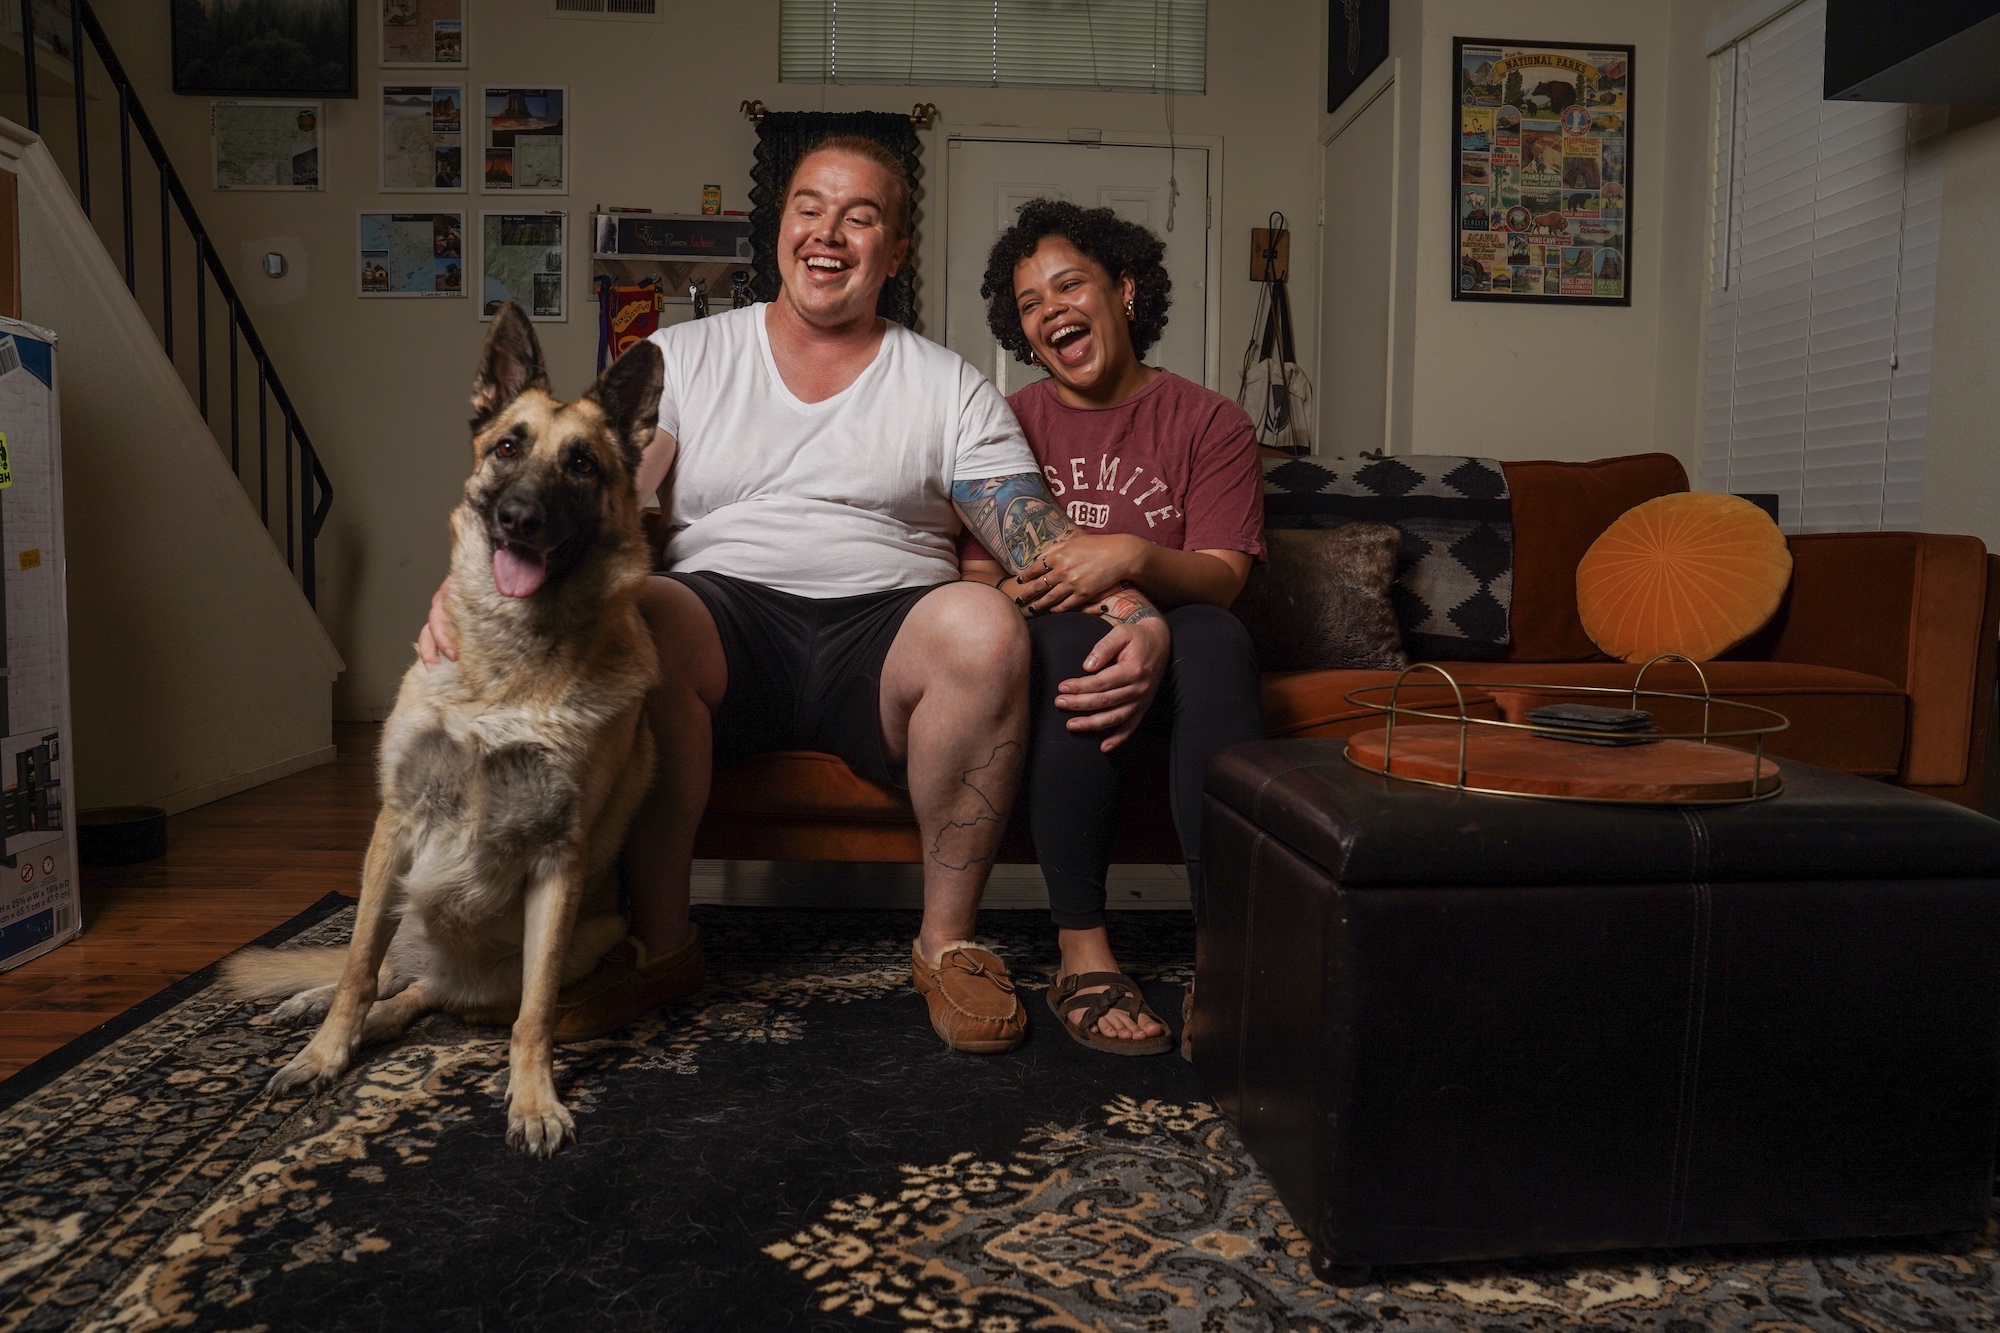 Matthew Treviño, Emily Fletcher and their dog Rosie, a german shepherd mix, sit on a couch at their home in Sacramento. Matthew is part of a UC Davis Health clinical trial for a hormonal birth control gel for men.